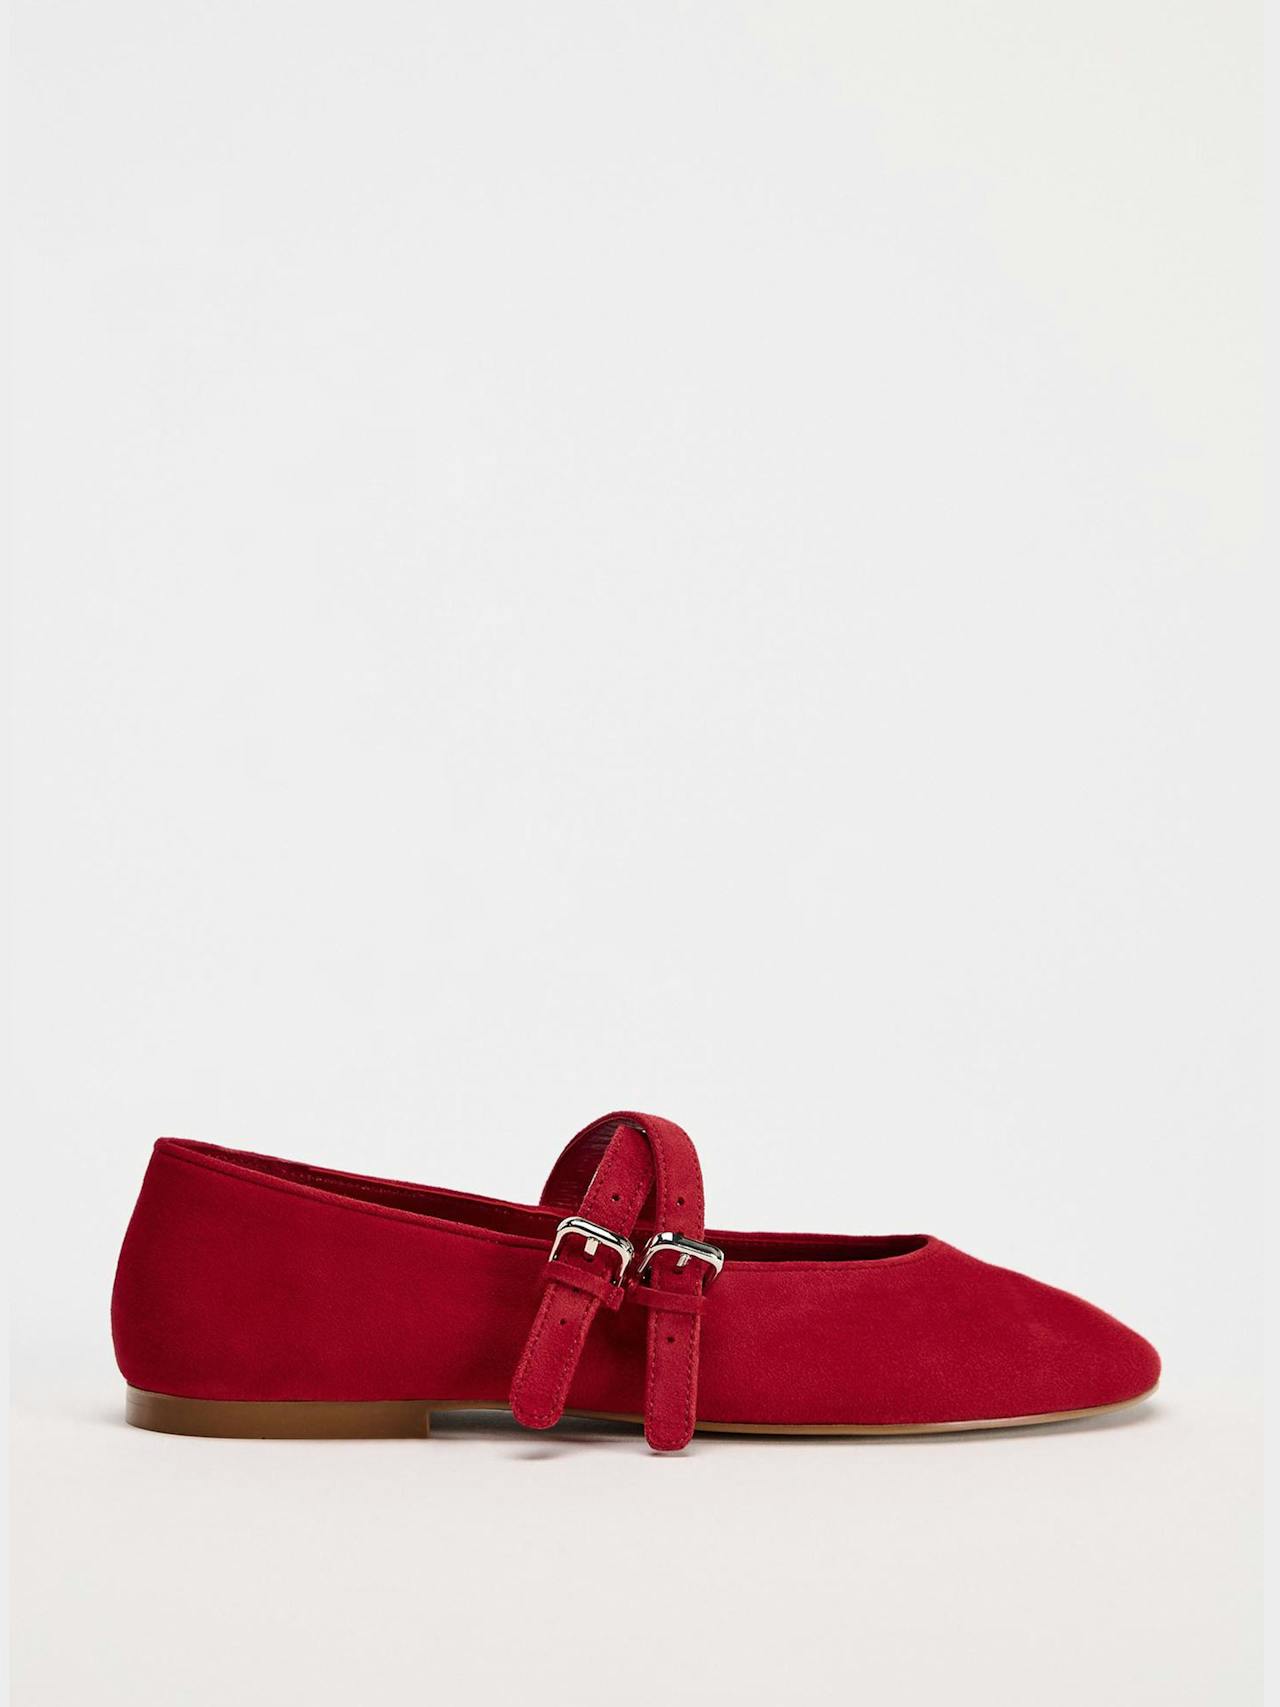 Leather ballet flats with double strap